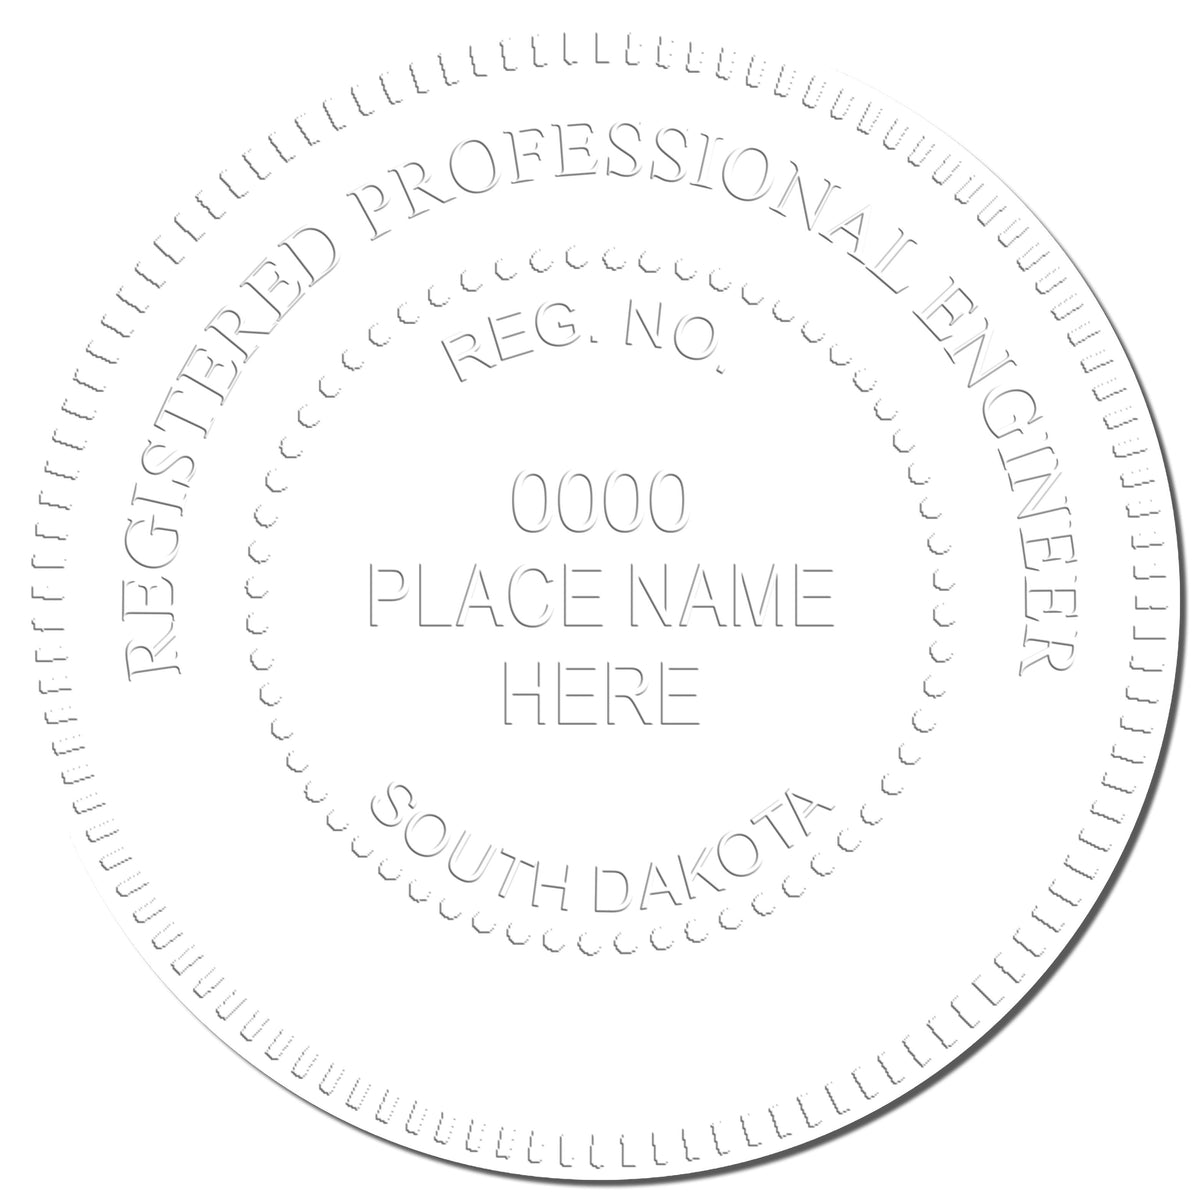 This paper is stamped with a sample imprint of the State of South Dakota Extended Long Reach Engineer Seal, signifying its quality and reliability.